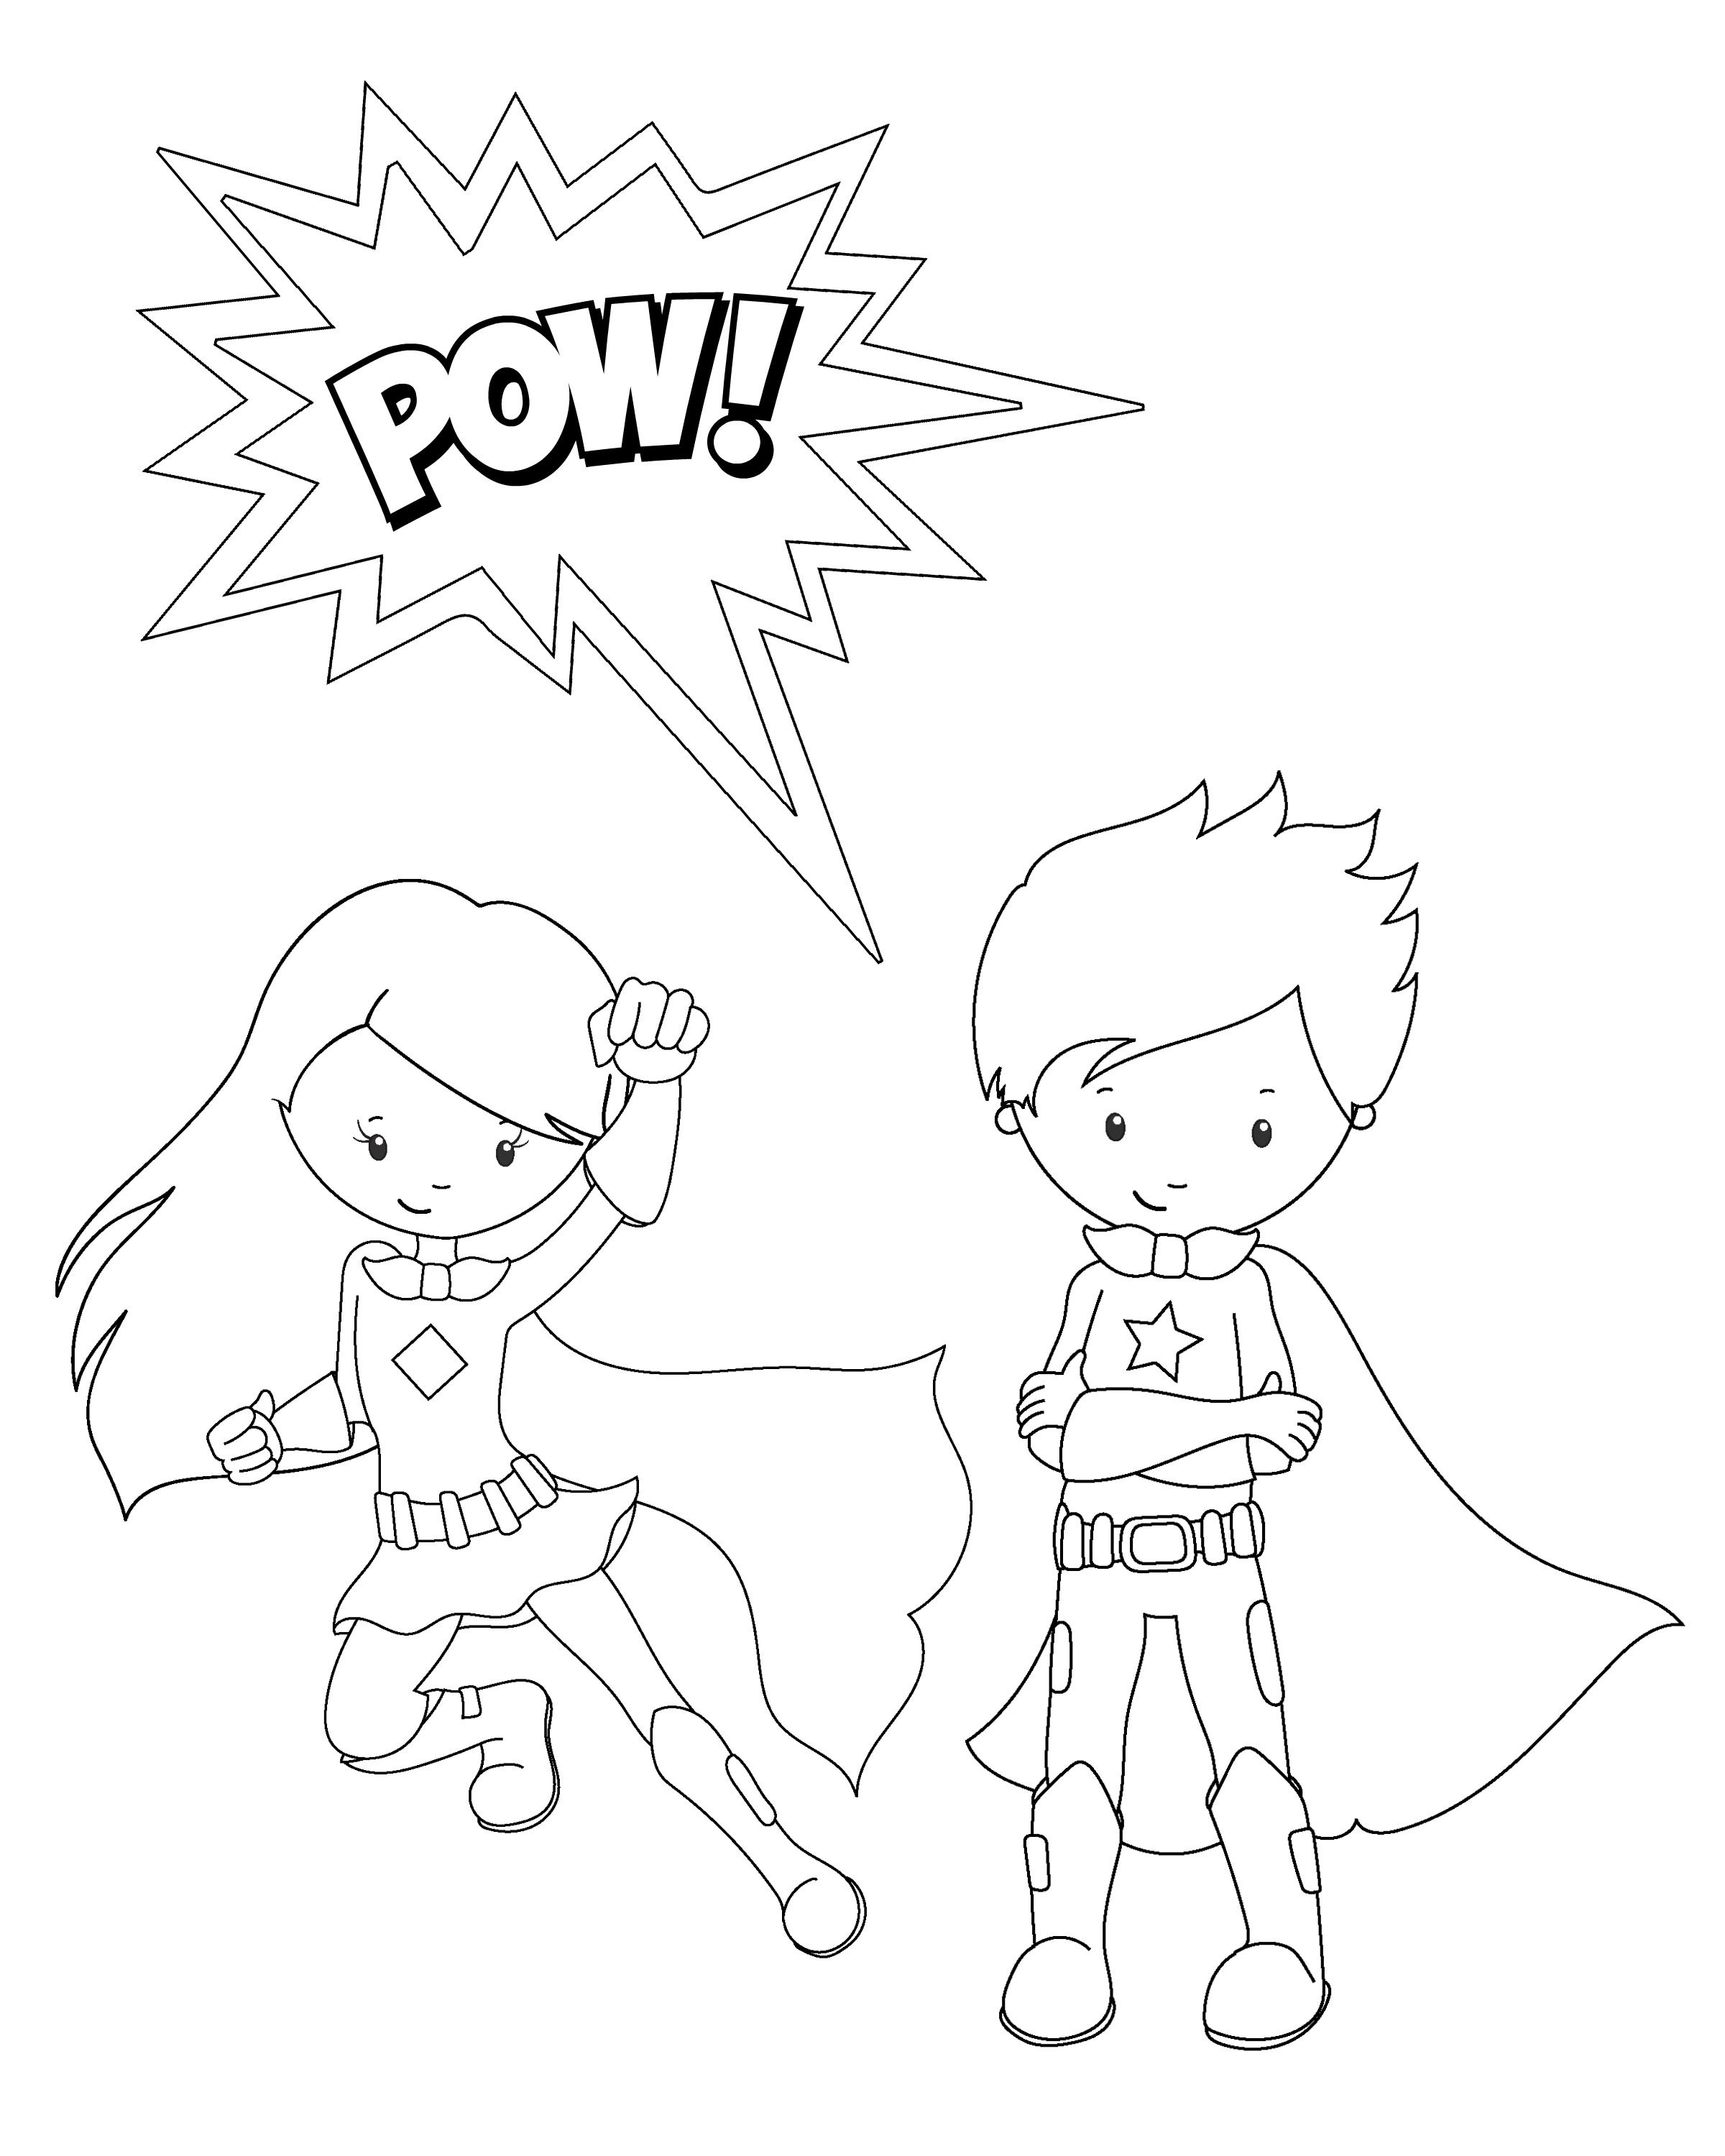 Free Printable Superhero Coloring Sheets For Kids | Summer Camp - Free Printable Superhero Coloring Pages